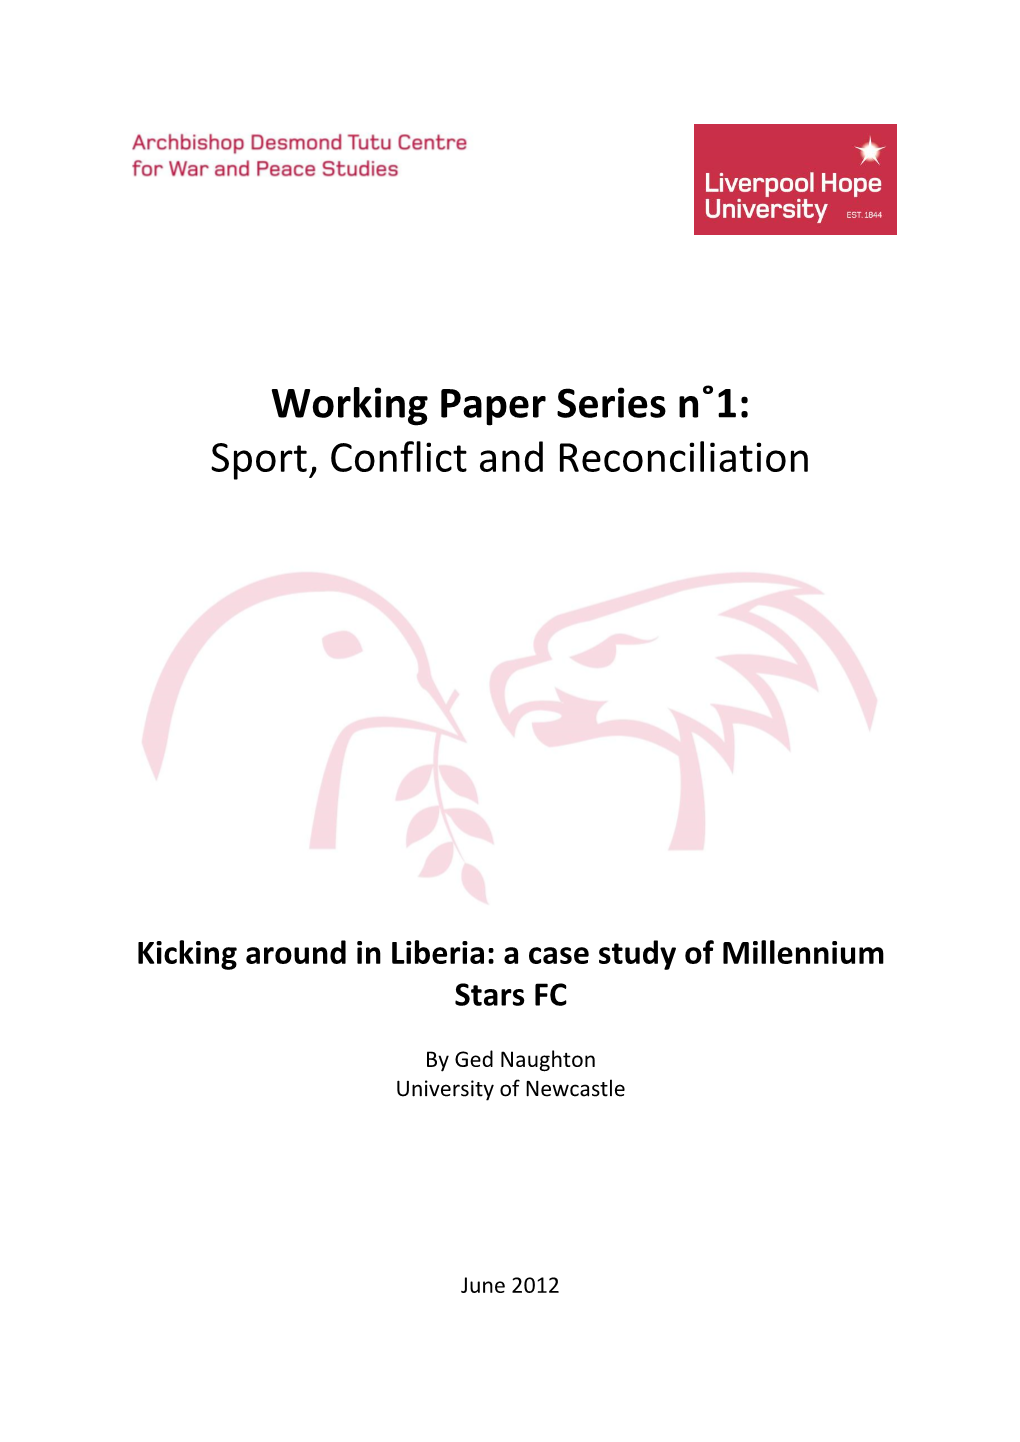 Working Paper Series N˚1: Sport, Conflict and Reconciliation